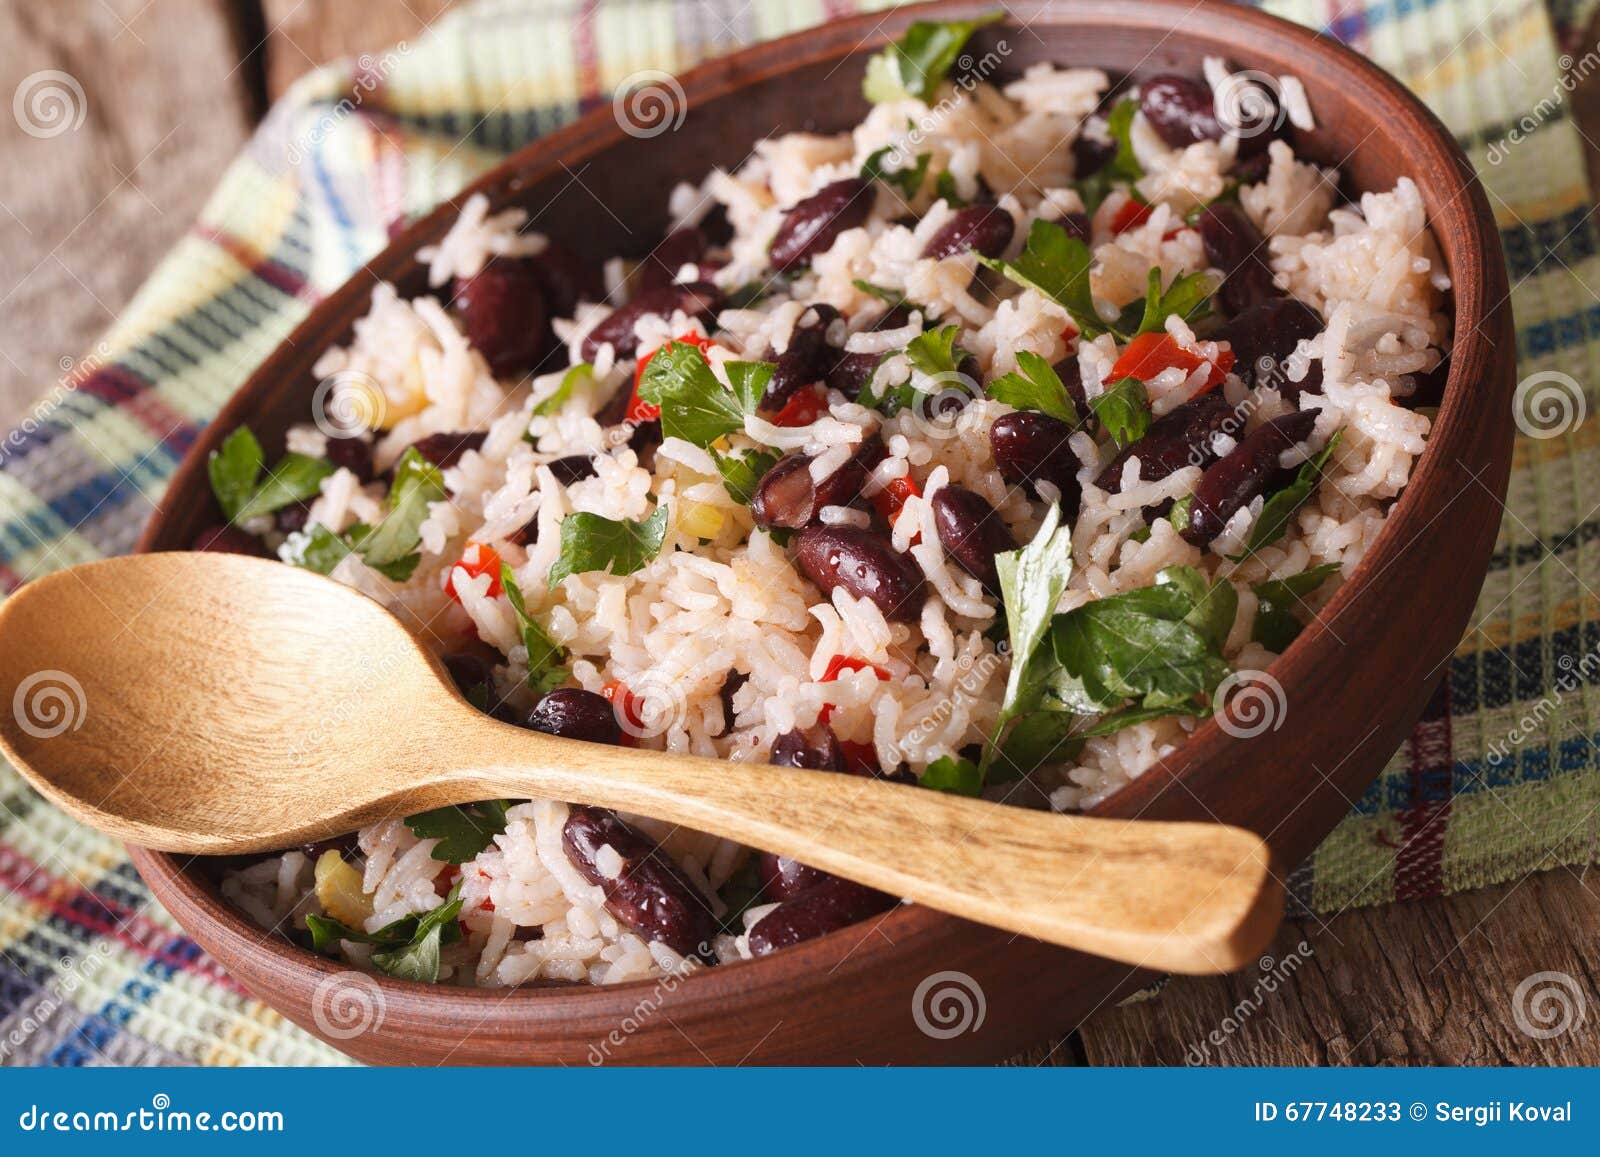 vegetarian food: rice with red beans in a bowl close-up. horizon